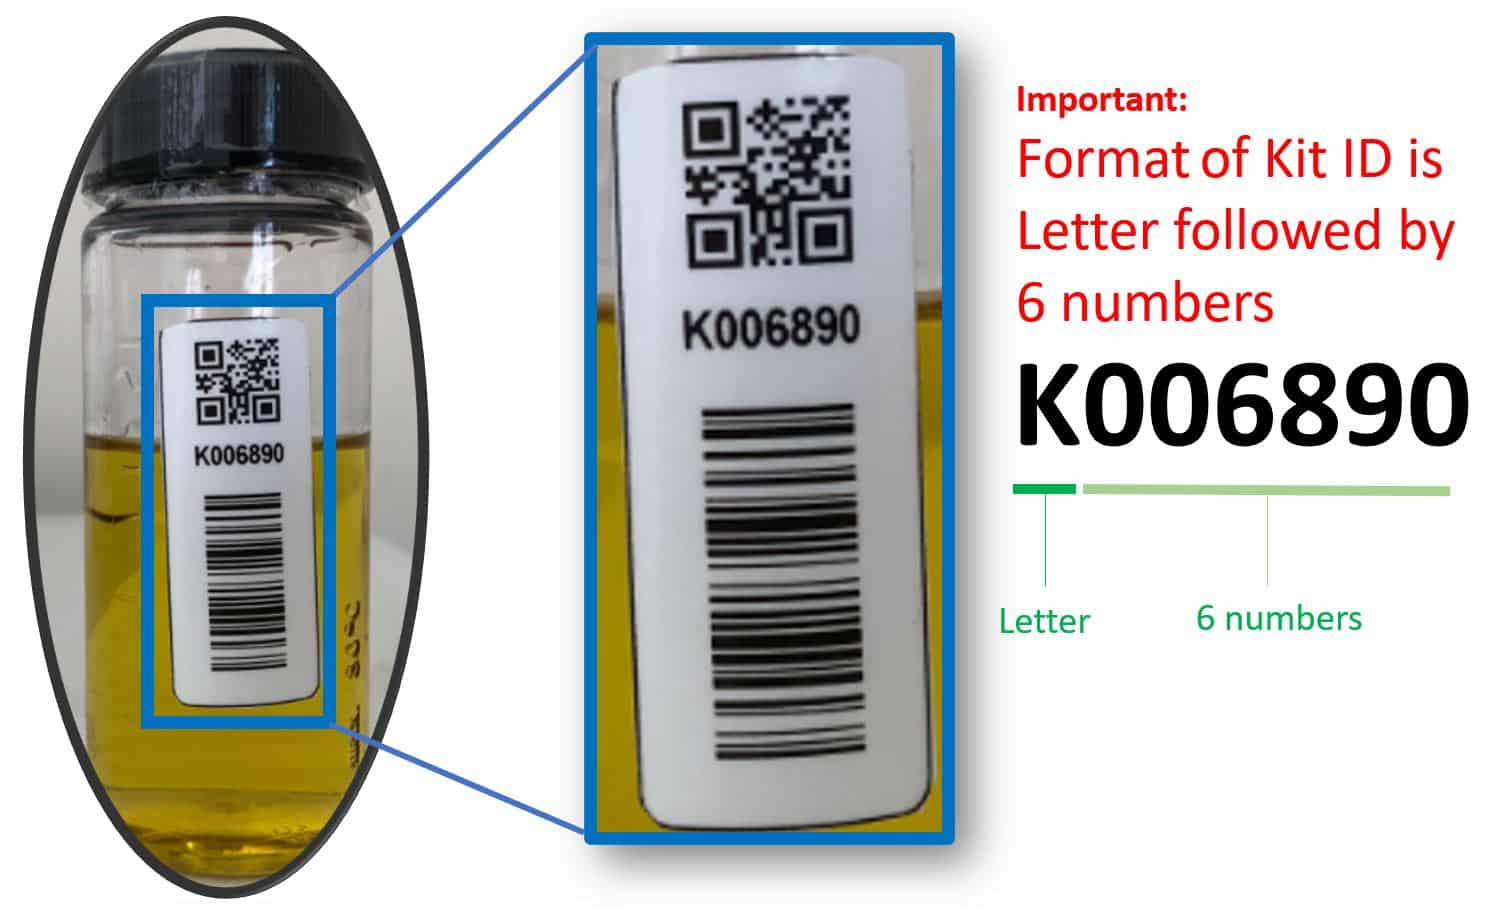 KitIDFormat Pre register samples for already created machines/assets (create sample labels step 2 of 2)